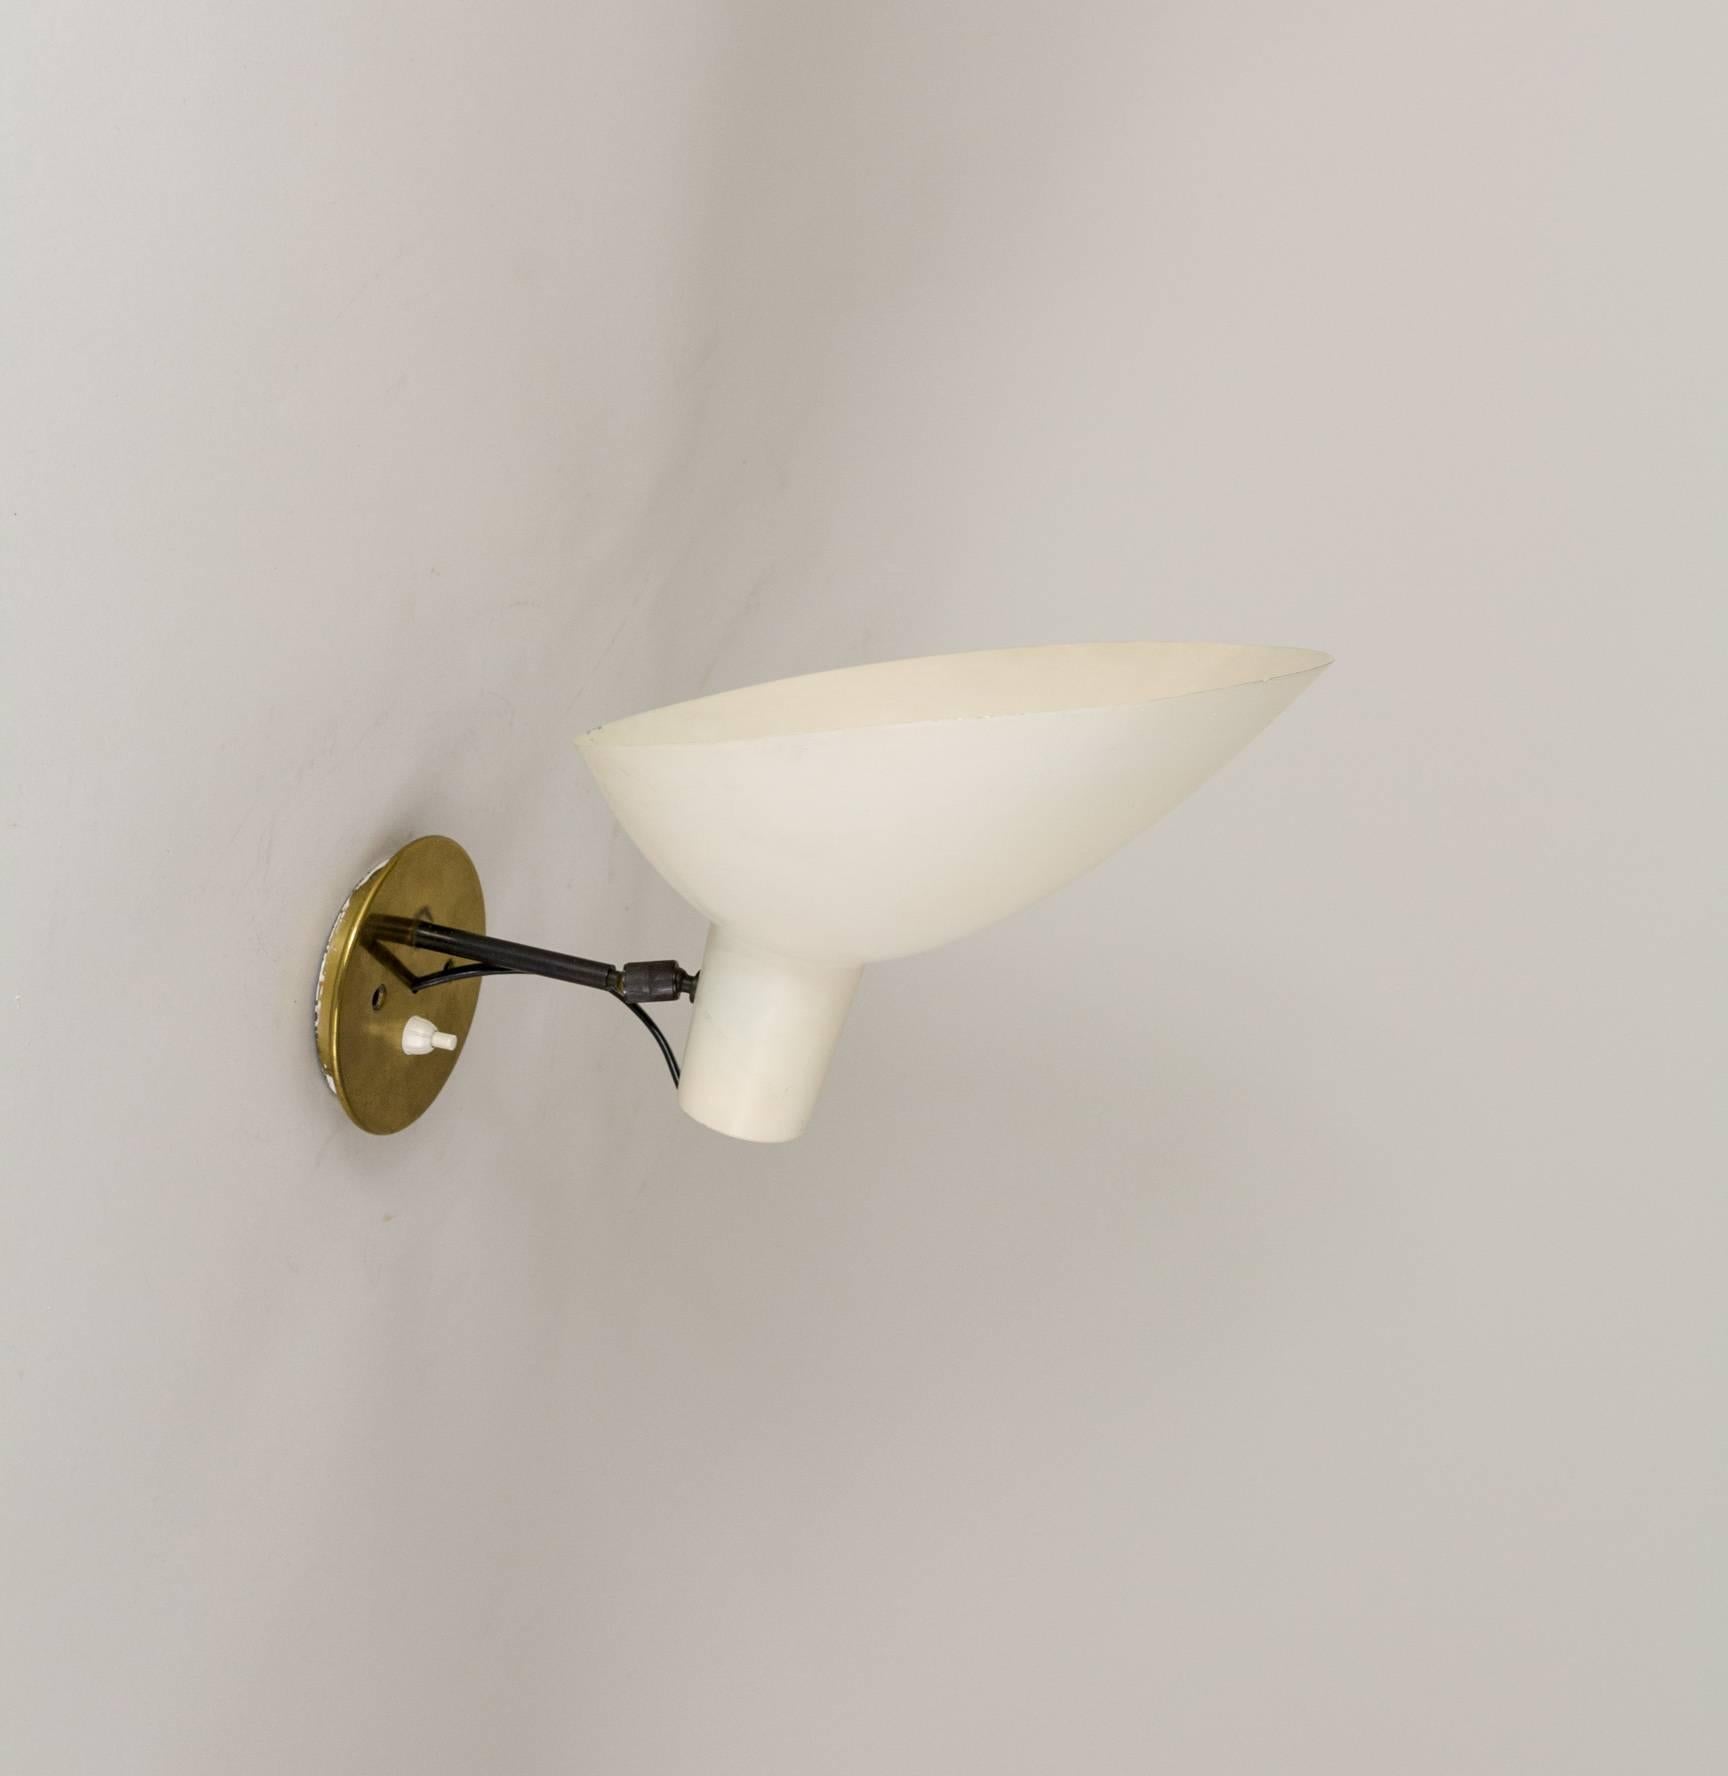 Elegantly visor-shaped wall lamp designed by architect, designer and professor Vittoriano Viganò for Arteluce, the famous Italian lighting company founded by Gino Sarfatti.

This cream-colored wall lamp is in good vintage condition, with some